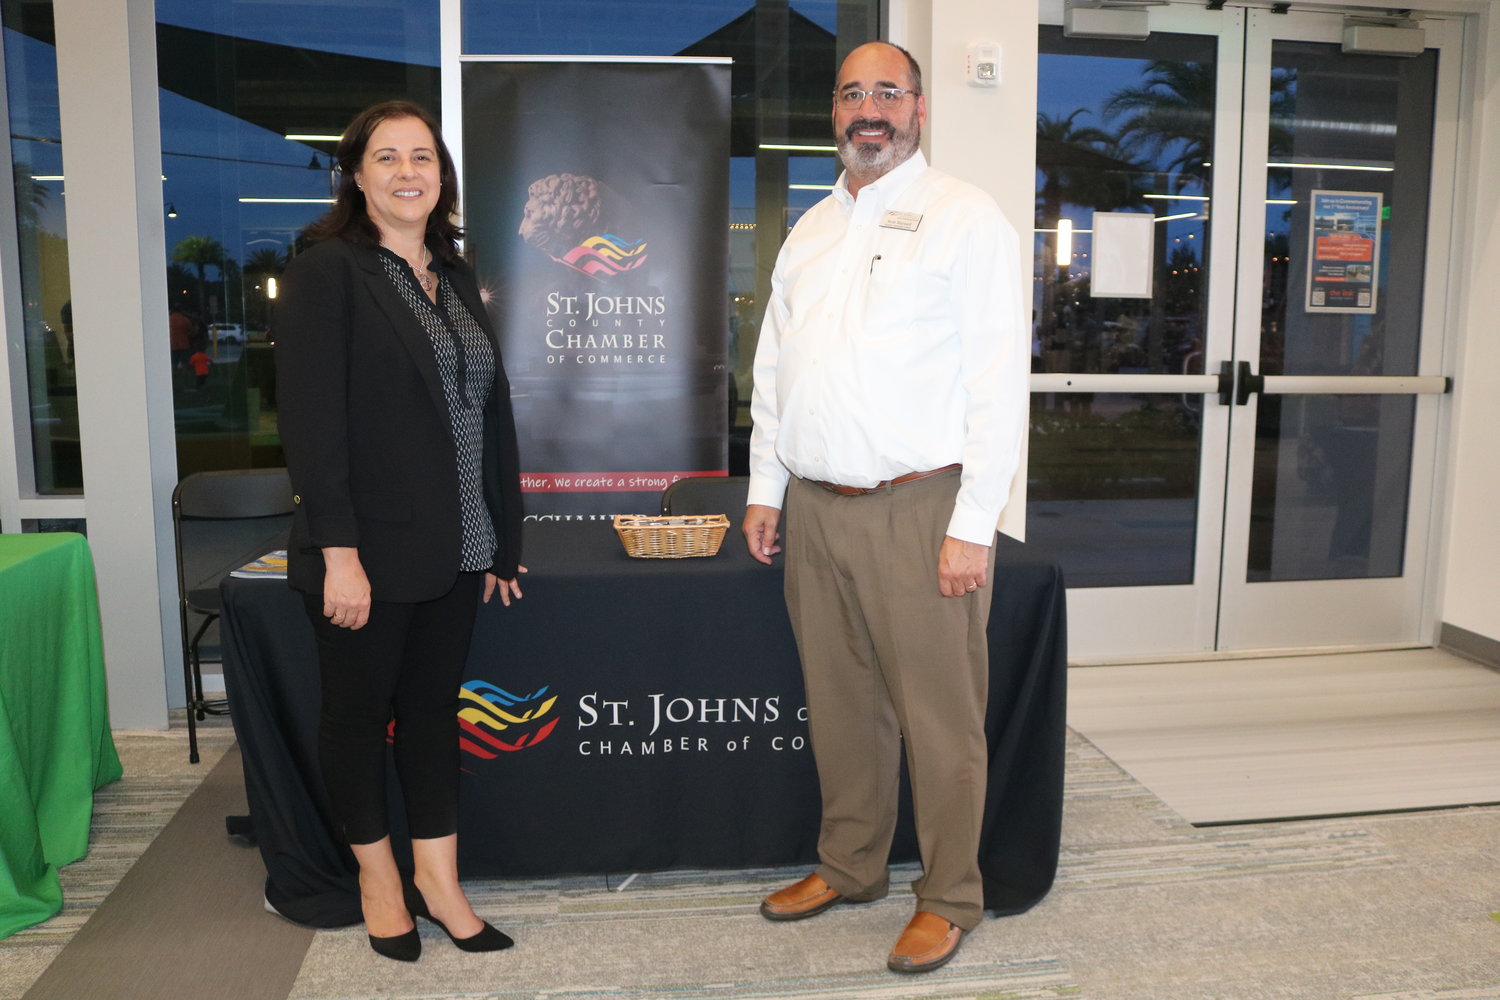 Isabelle Renault, St. Johns County Chamber of Commerce president and CEO, and Scott Maynard, director of economic development for the Chamber, are seen at one of the tables at the link’s Business Expo.